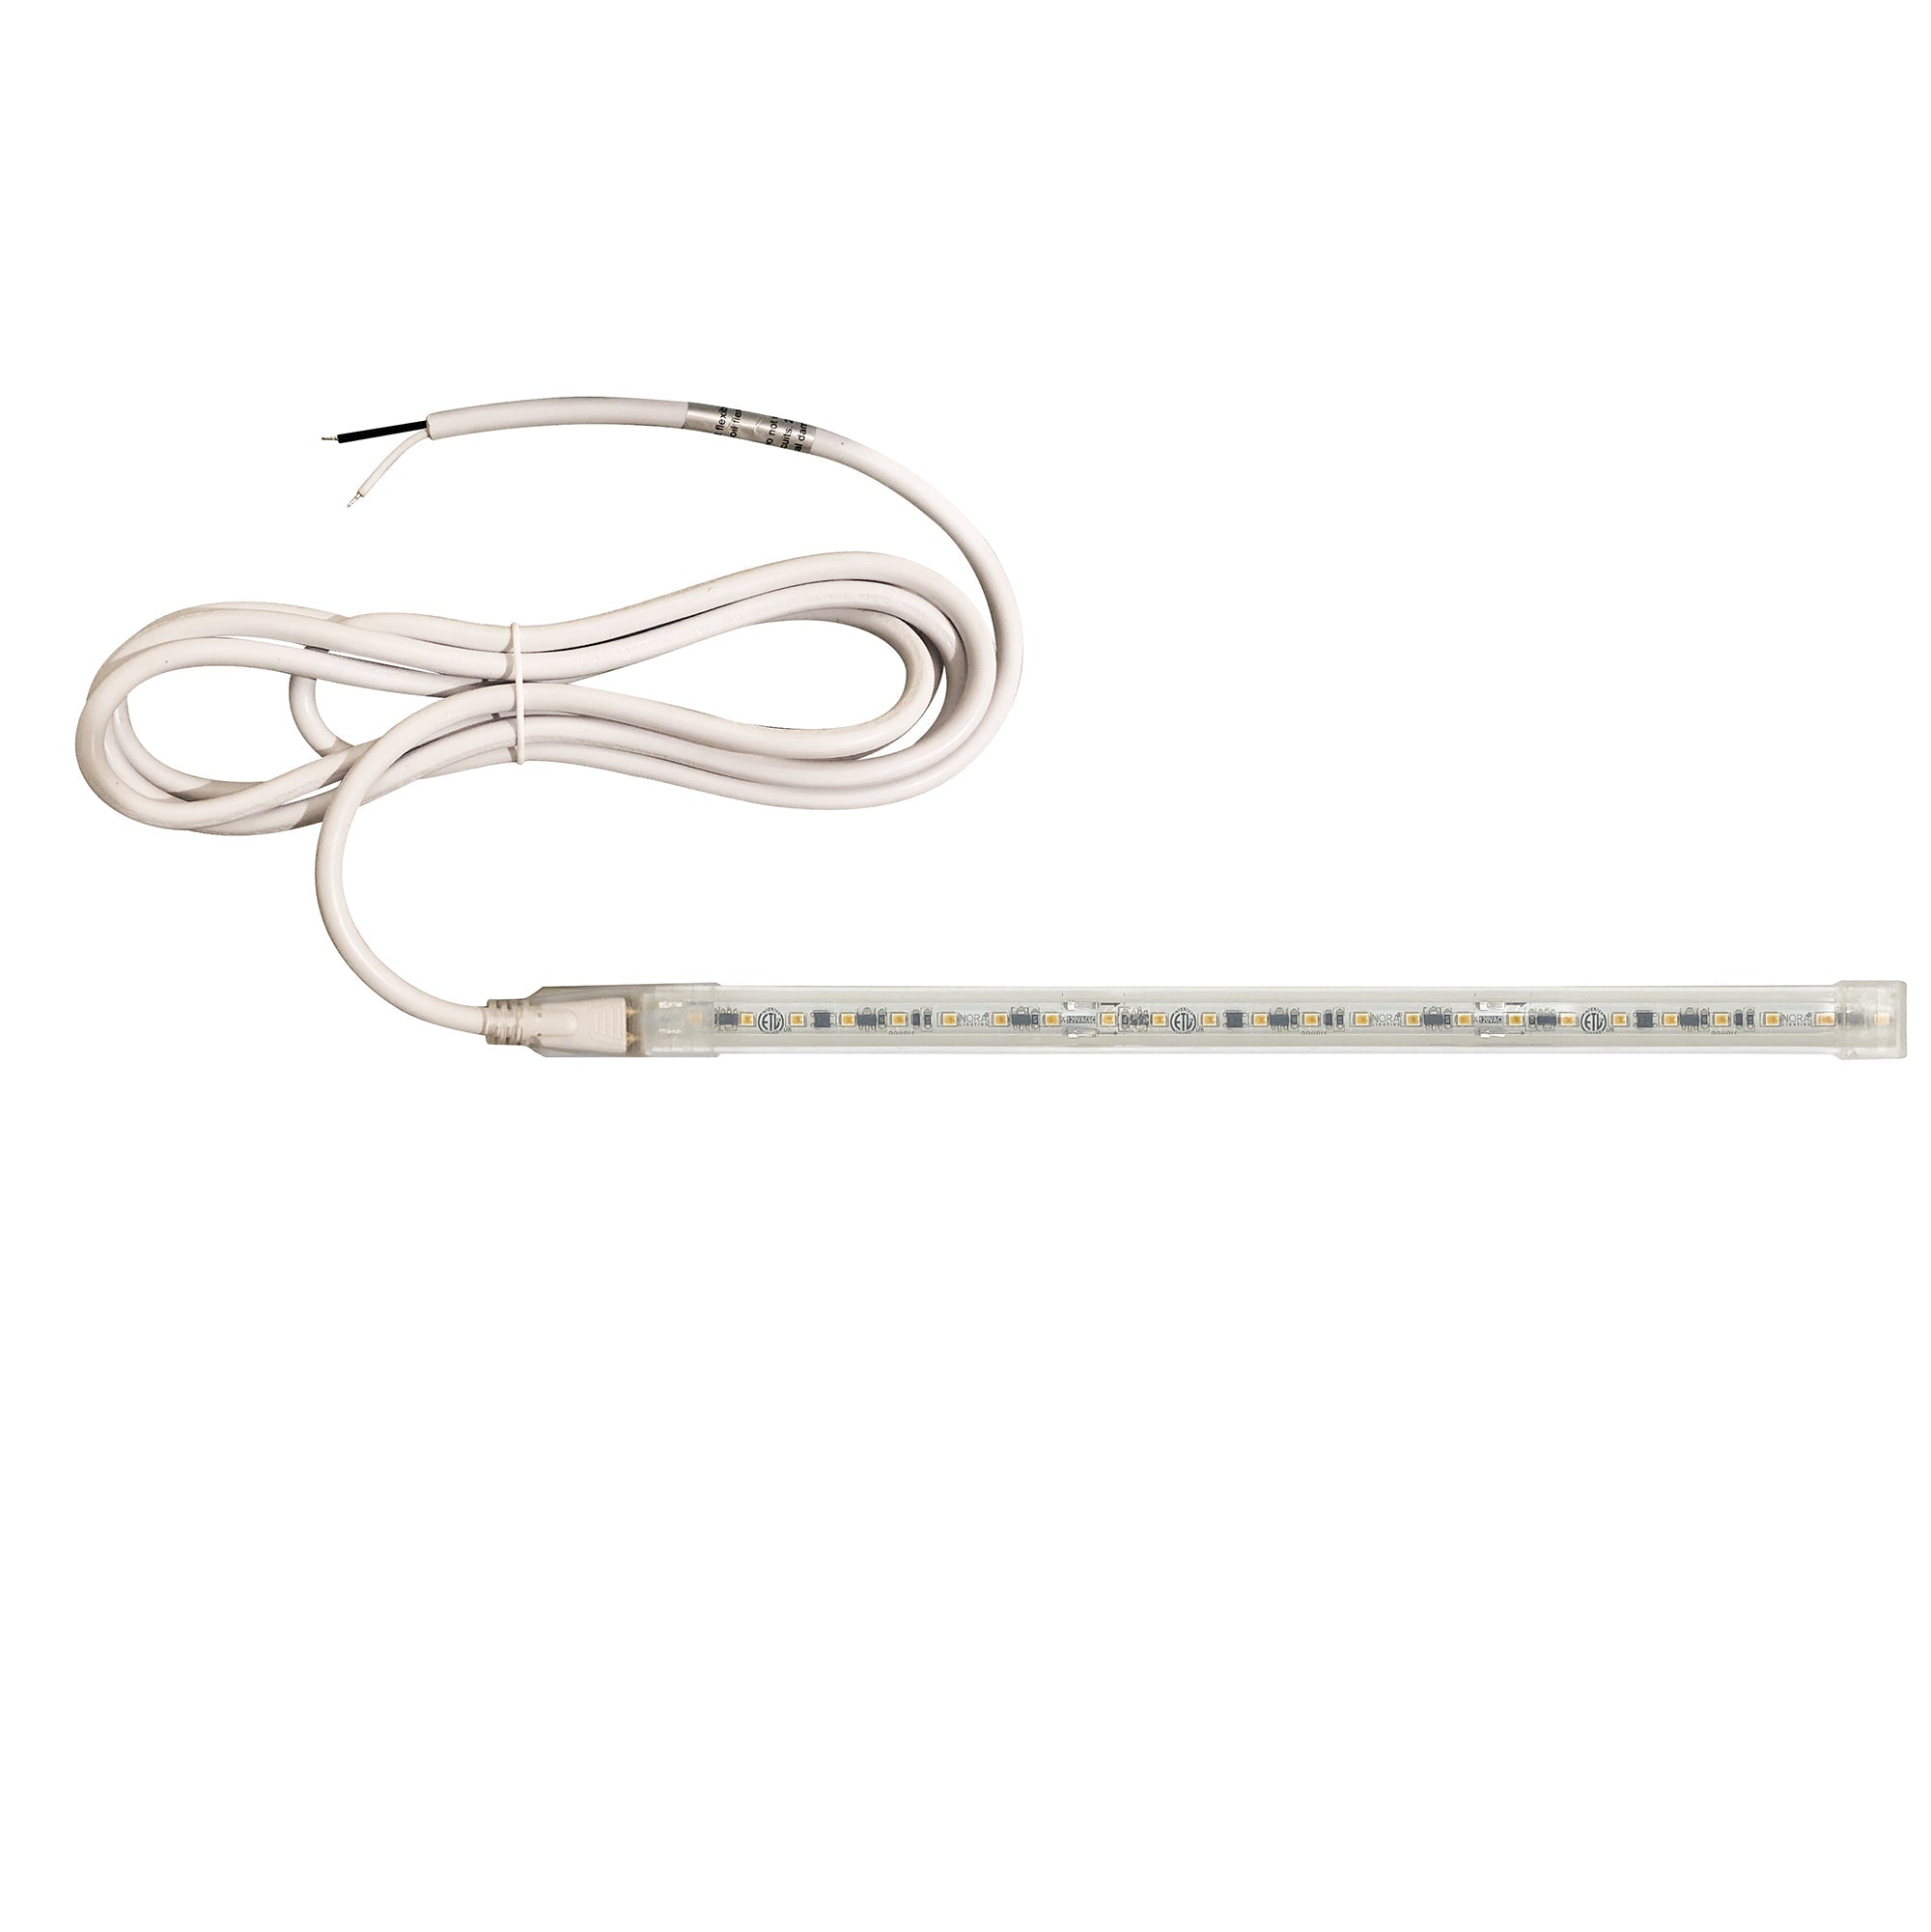 Nora Lighting NUTP13-W42-12-927/HW - Accent / Undercabinet - Custom Cut 42-ft 120V Continuous LED Tape Light, 330lm / 3.6W per foot, 2700K, w/ Mounting Clips and 8' Hardwired Power Cord